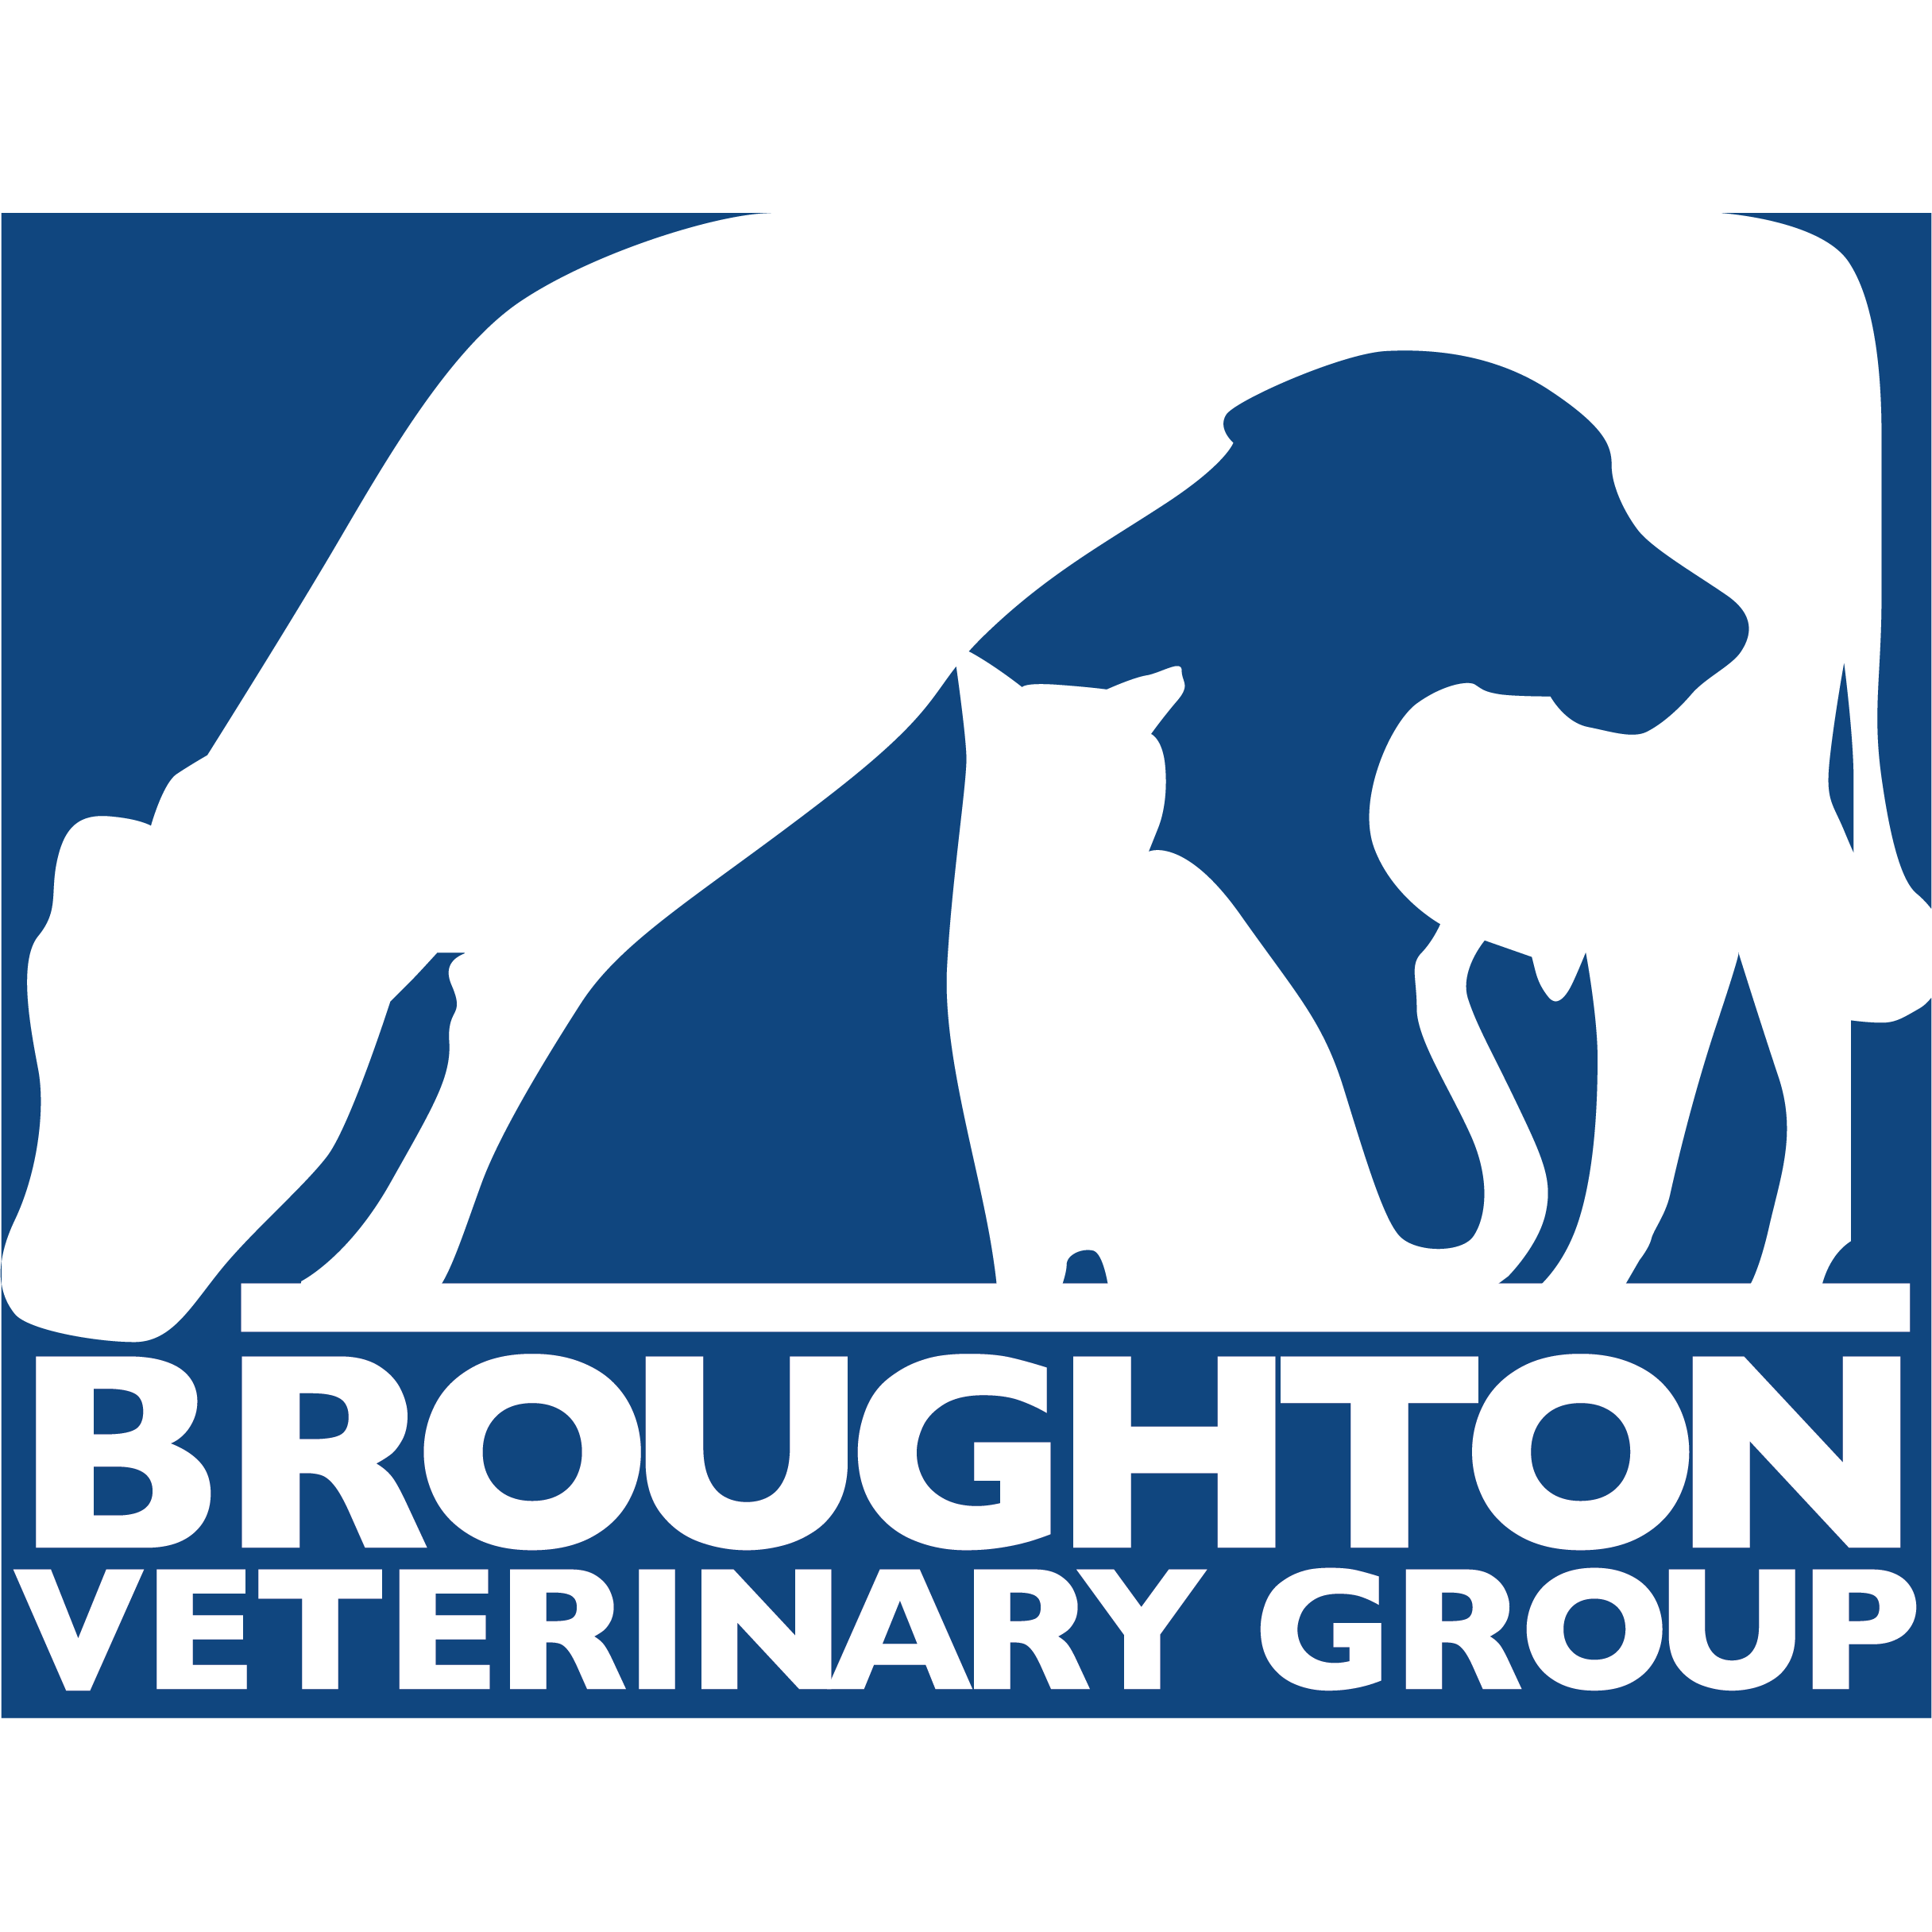 Broughton Veterinary Group, Lutterworth - Lutterworth, Leicestershire LE17 4NJ - 01455 552117 | ShowMeLocal.com